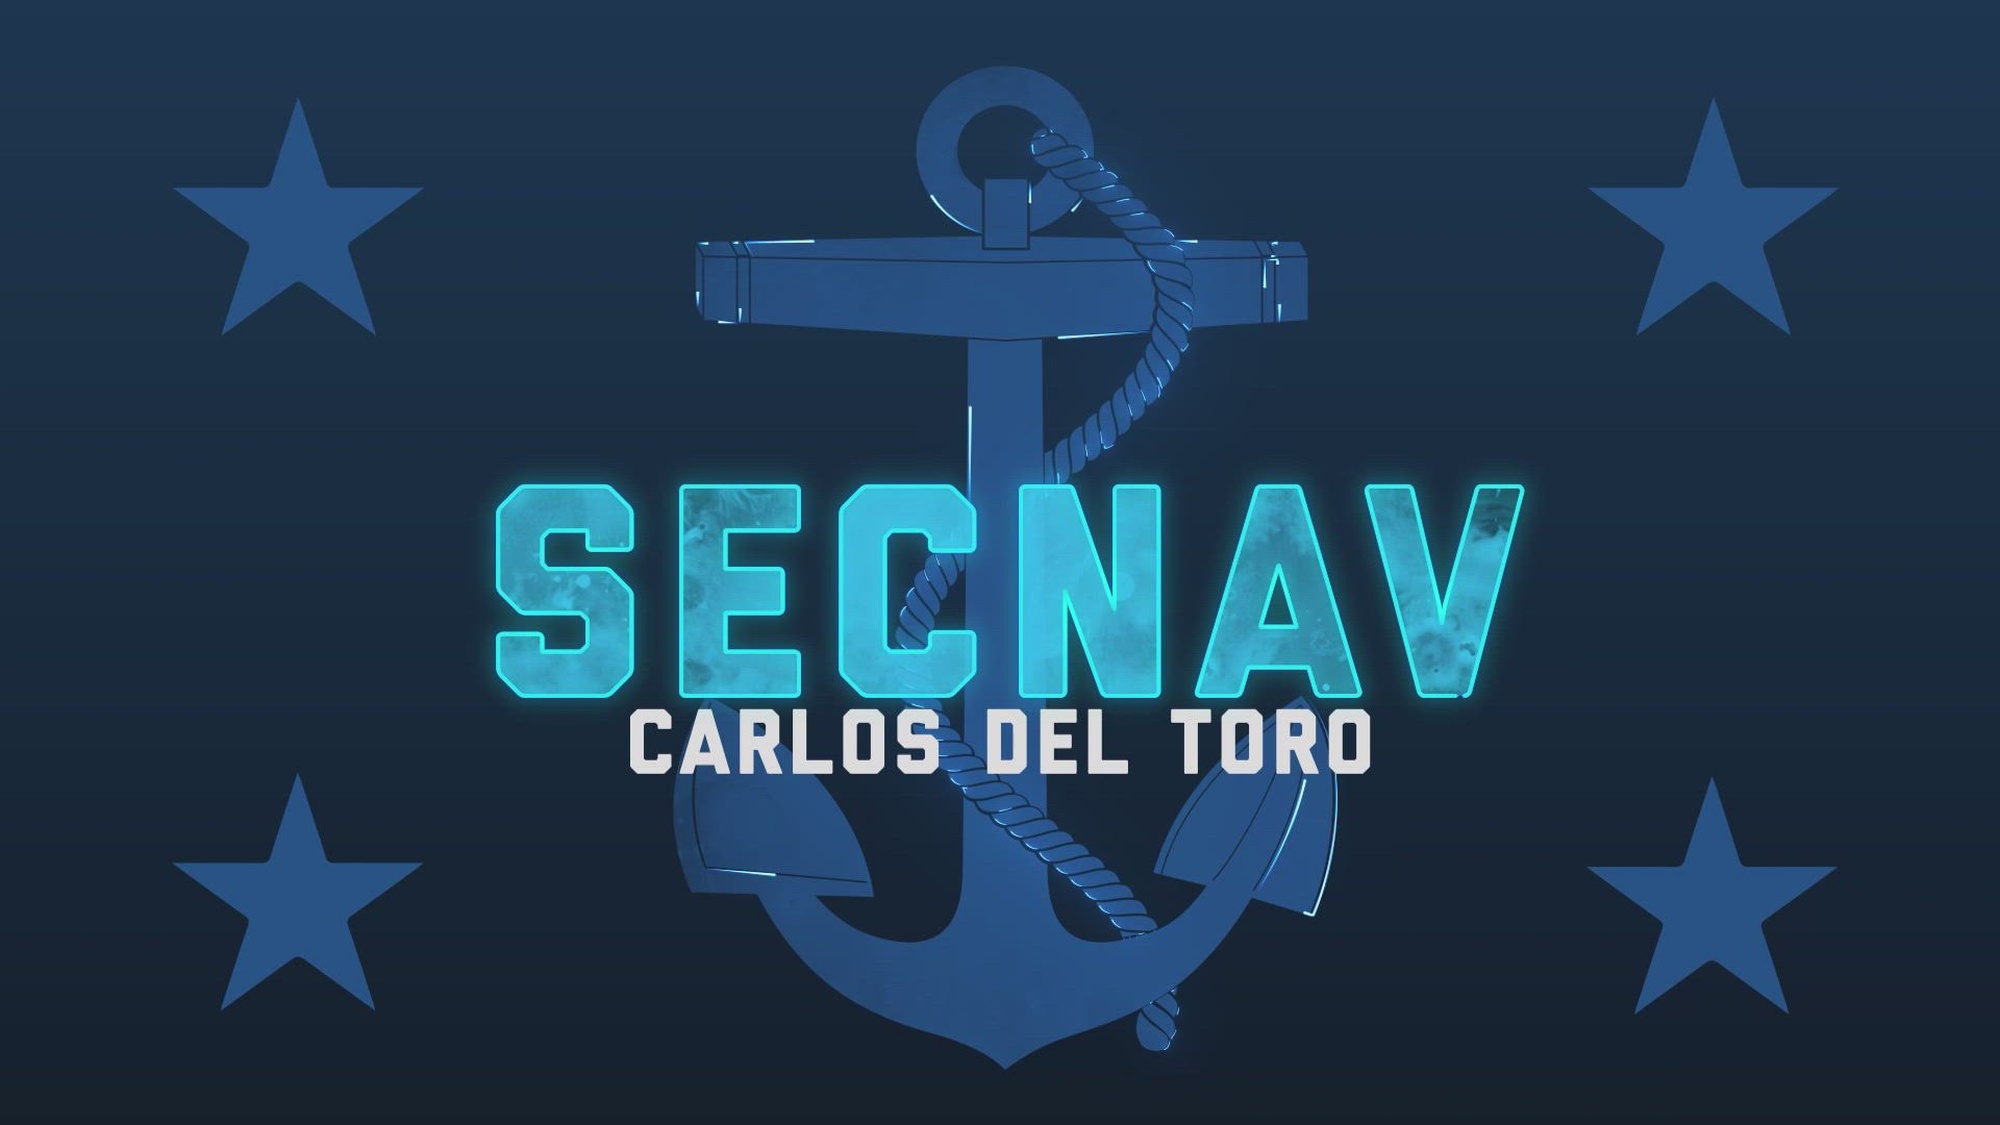 220408-N-SR275-1004 WASHINGTON (April 8, 2022) — Secretary of the Navy Carlos Del Toro delivers a message for Sexual Assault Awareness and Prevention Month. (U.S. Navy video by Mass Communication Specialist 2nd Class T. Logan Keown/Released)